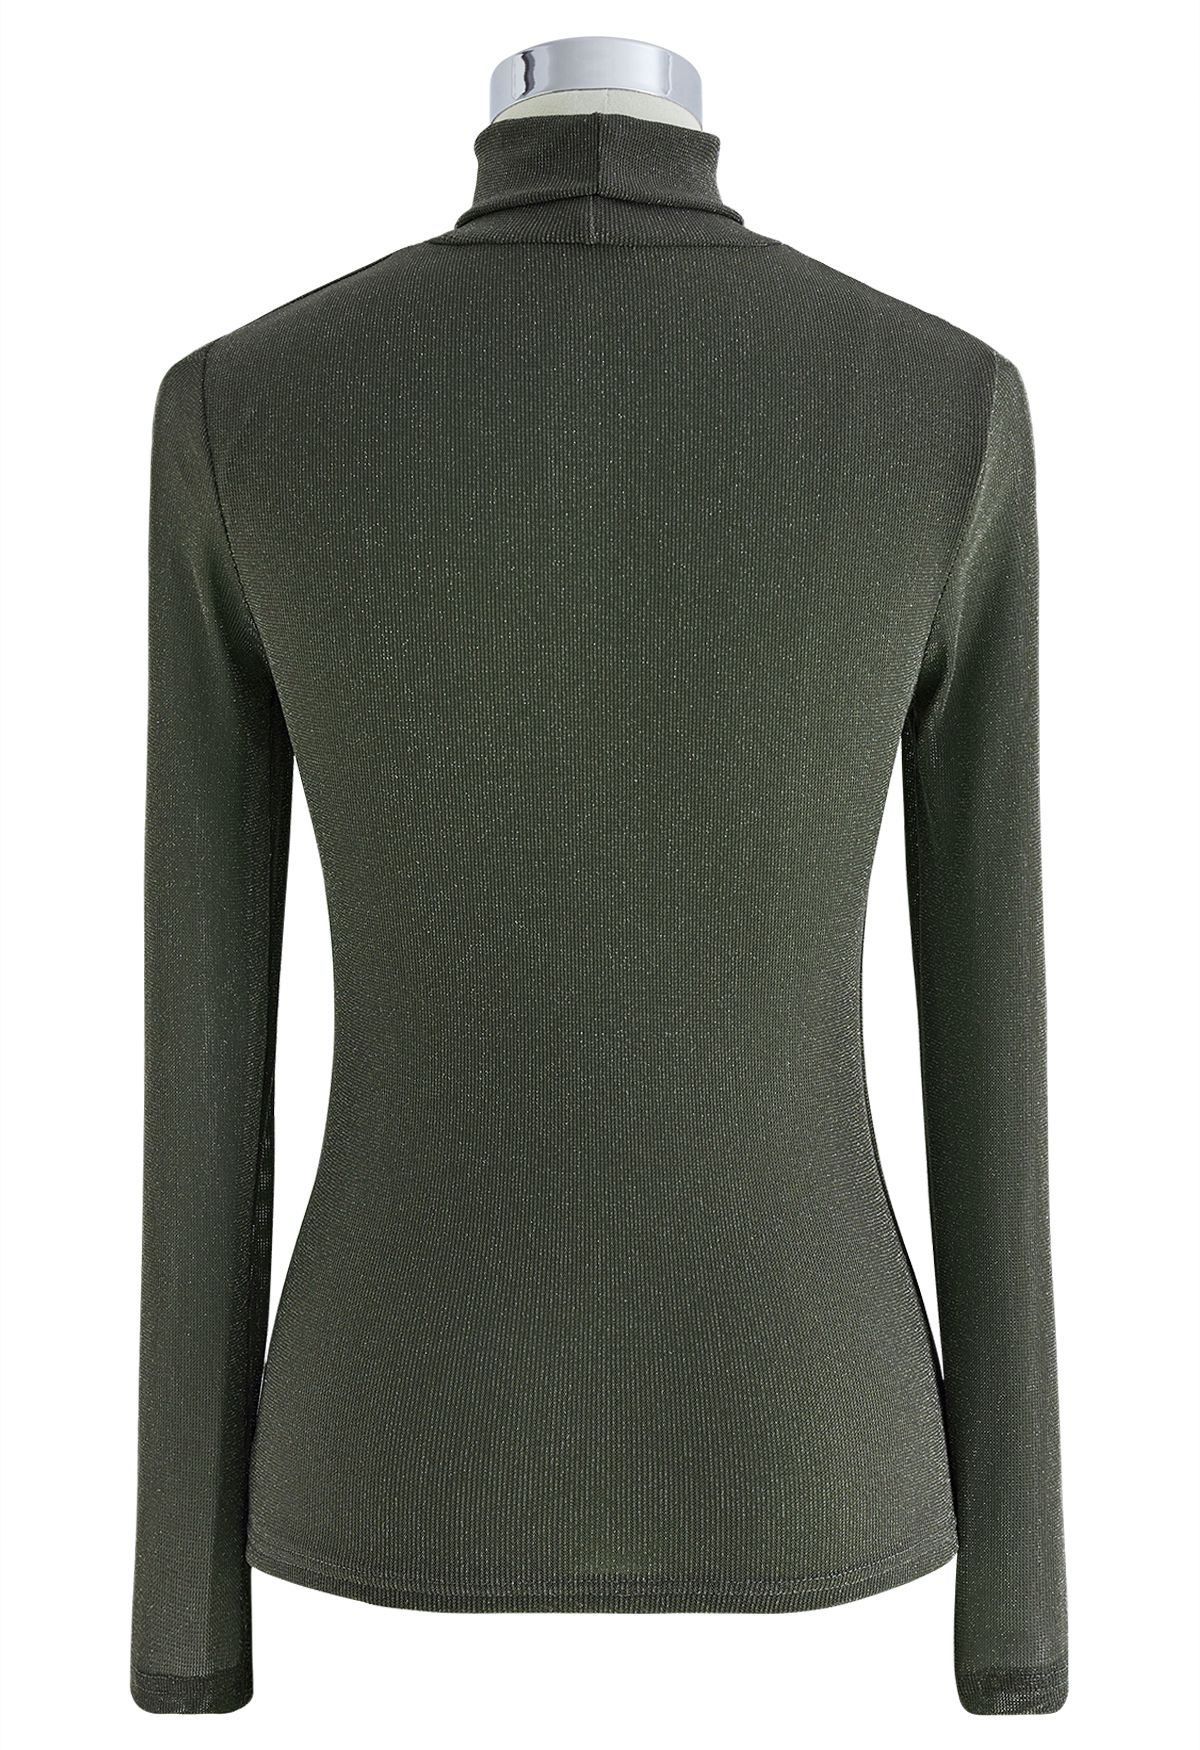 Shimmer Mesh Pleated High Neck Top in Army Green